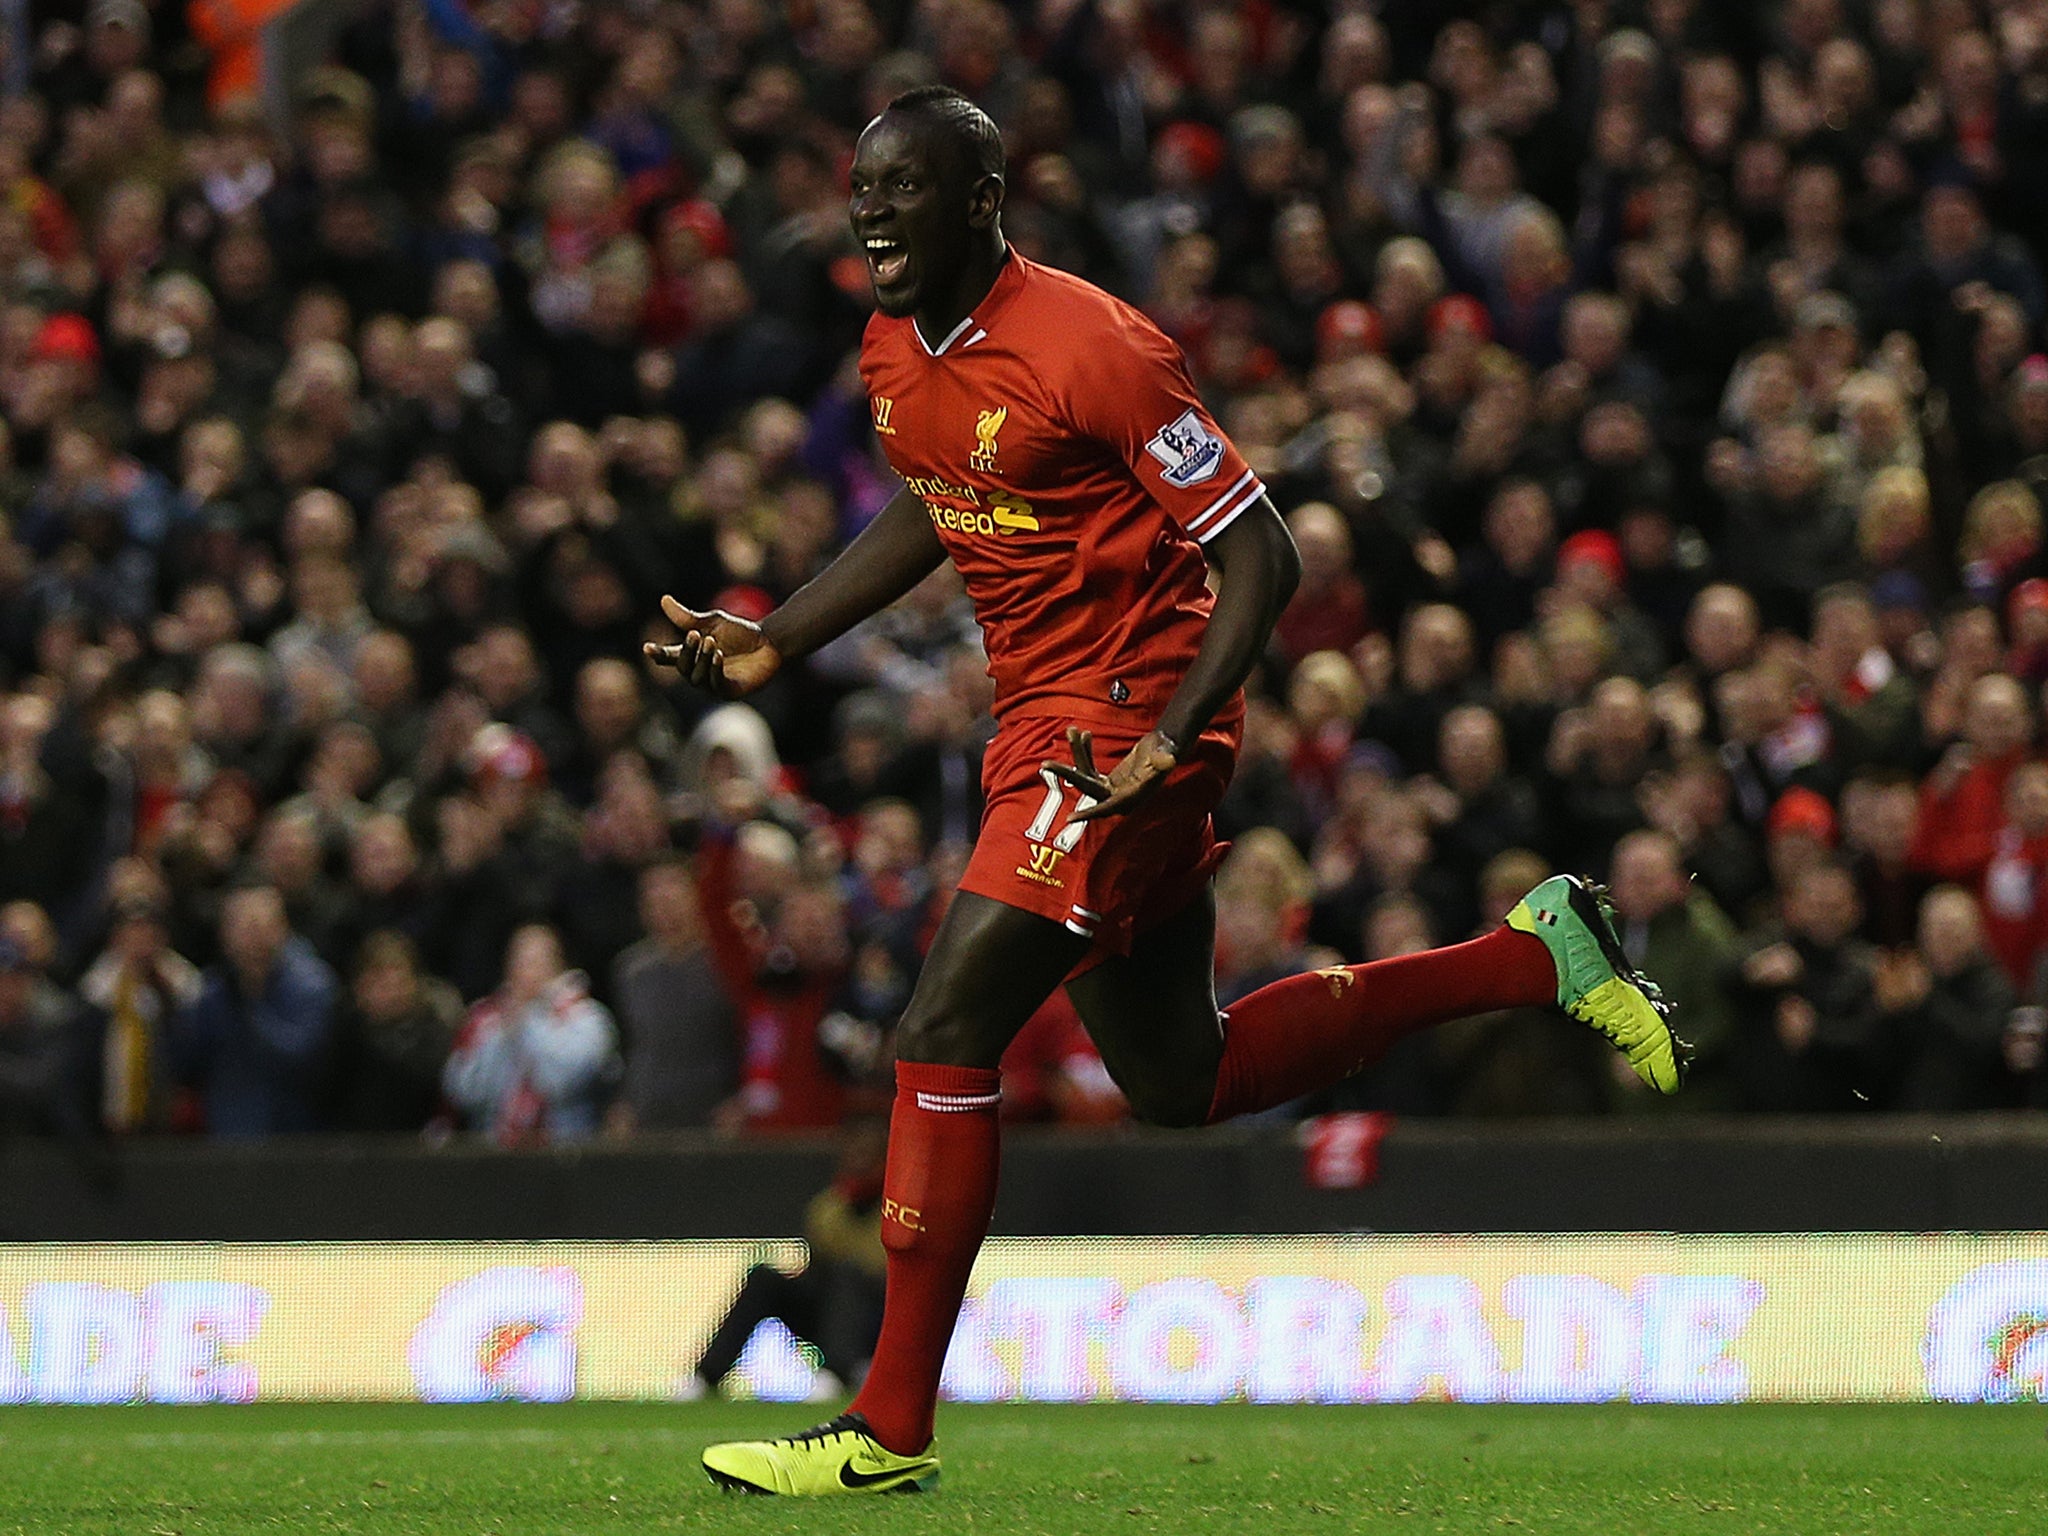 Mamadou Sakho has challenged Liverpool to push on and make history with Premier League title success